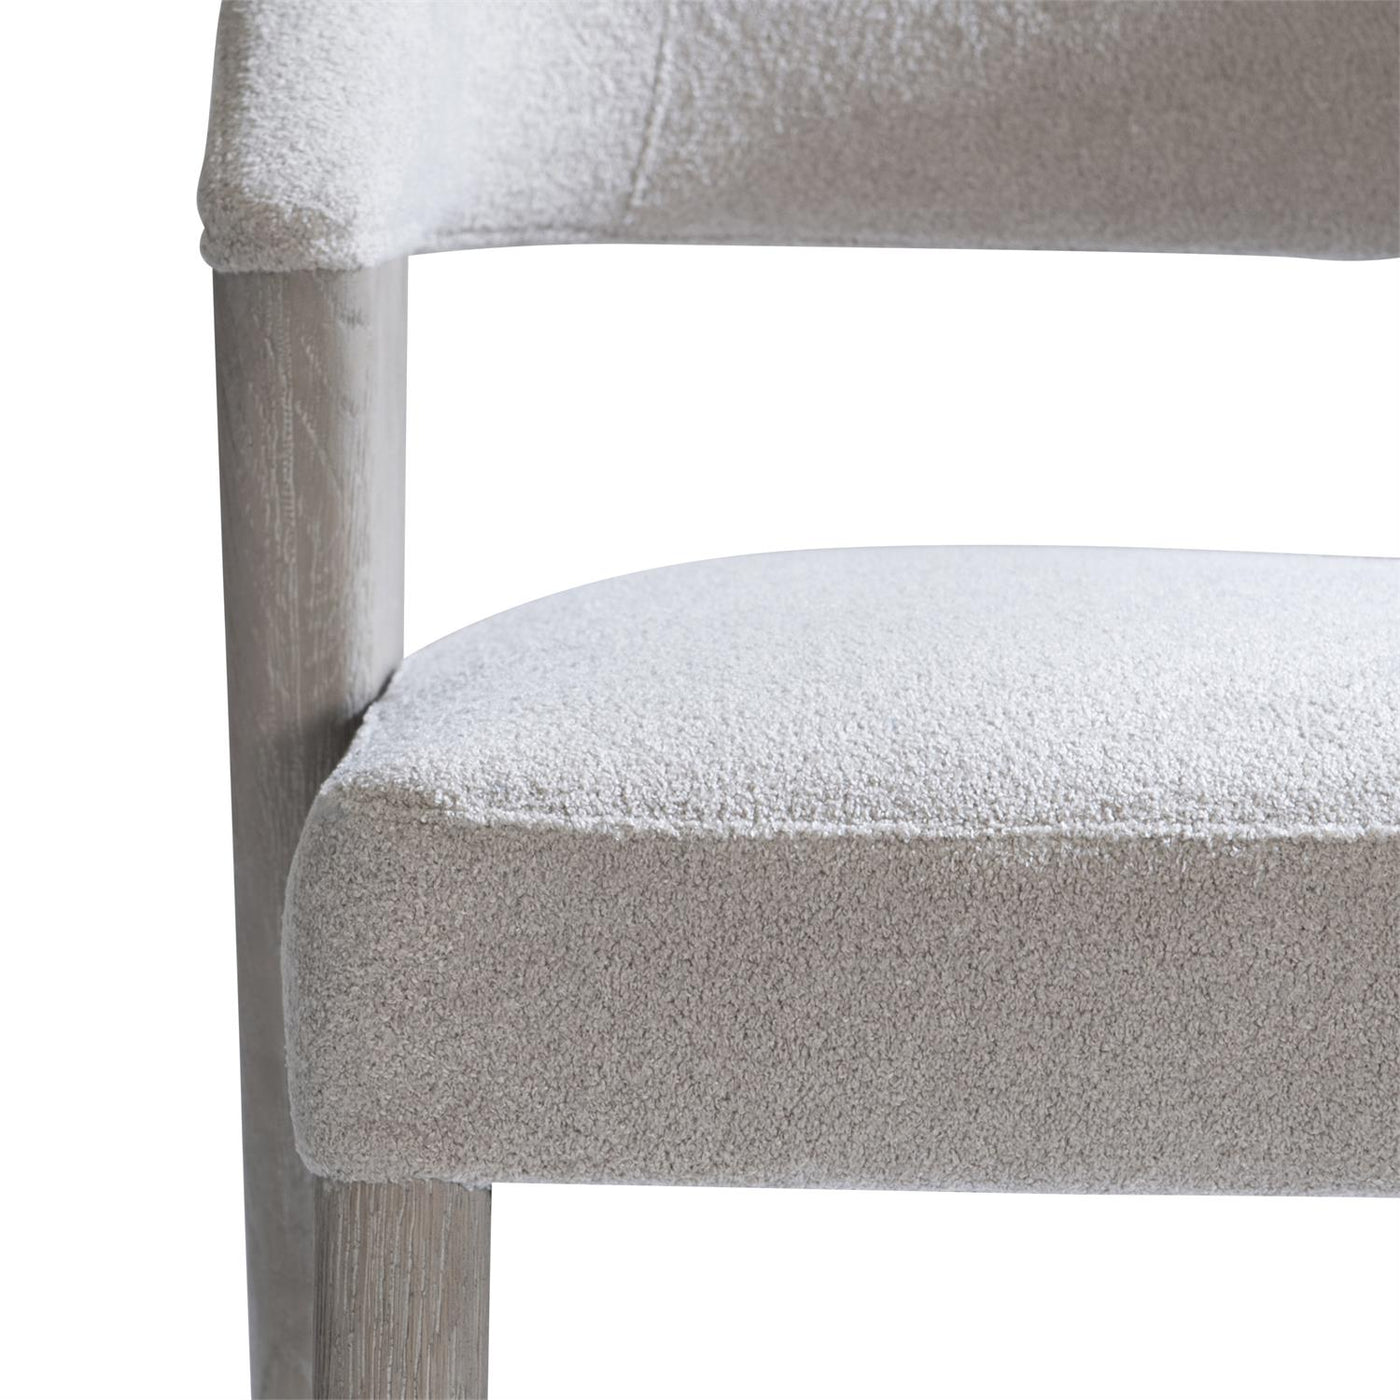 CHAIR ARM WOOD UPHOLSTERED